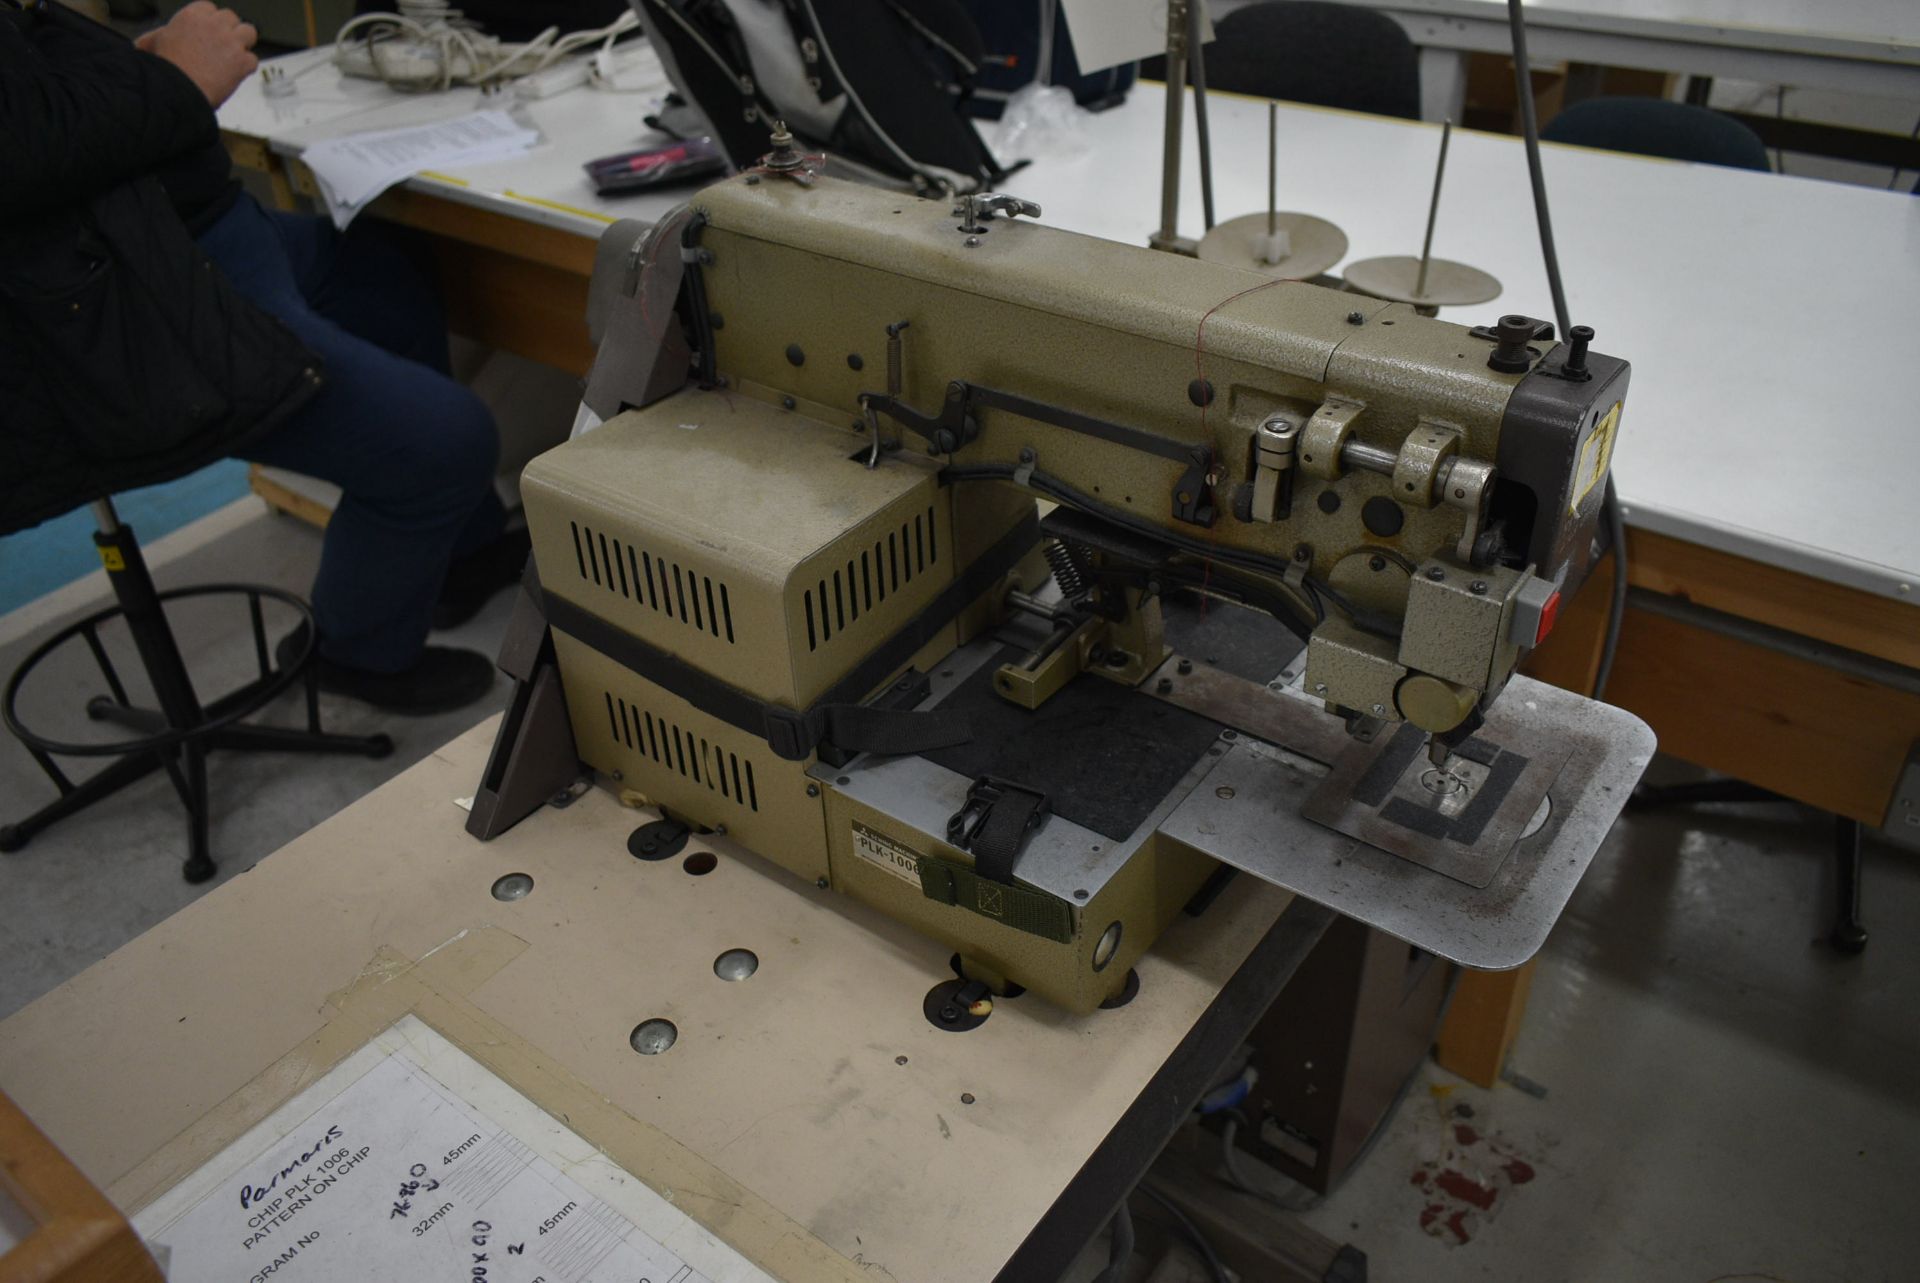 Mitsubishi PLK-10060 PROGRAMMABLE SEWING MACHINE, serial no. 150450, with bench and Limi-Stop Z - Image 3 of 7